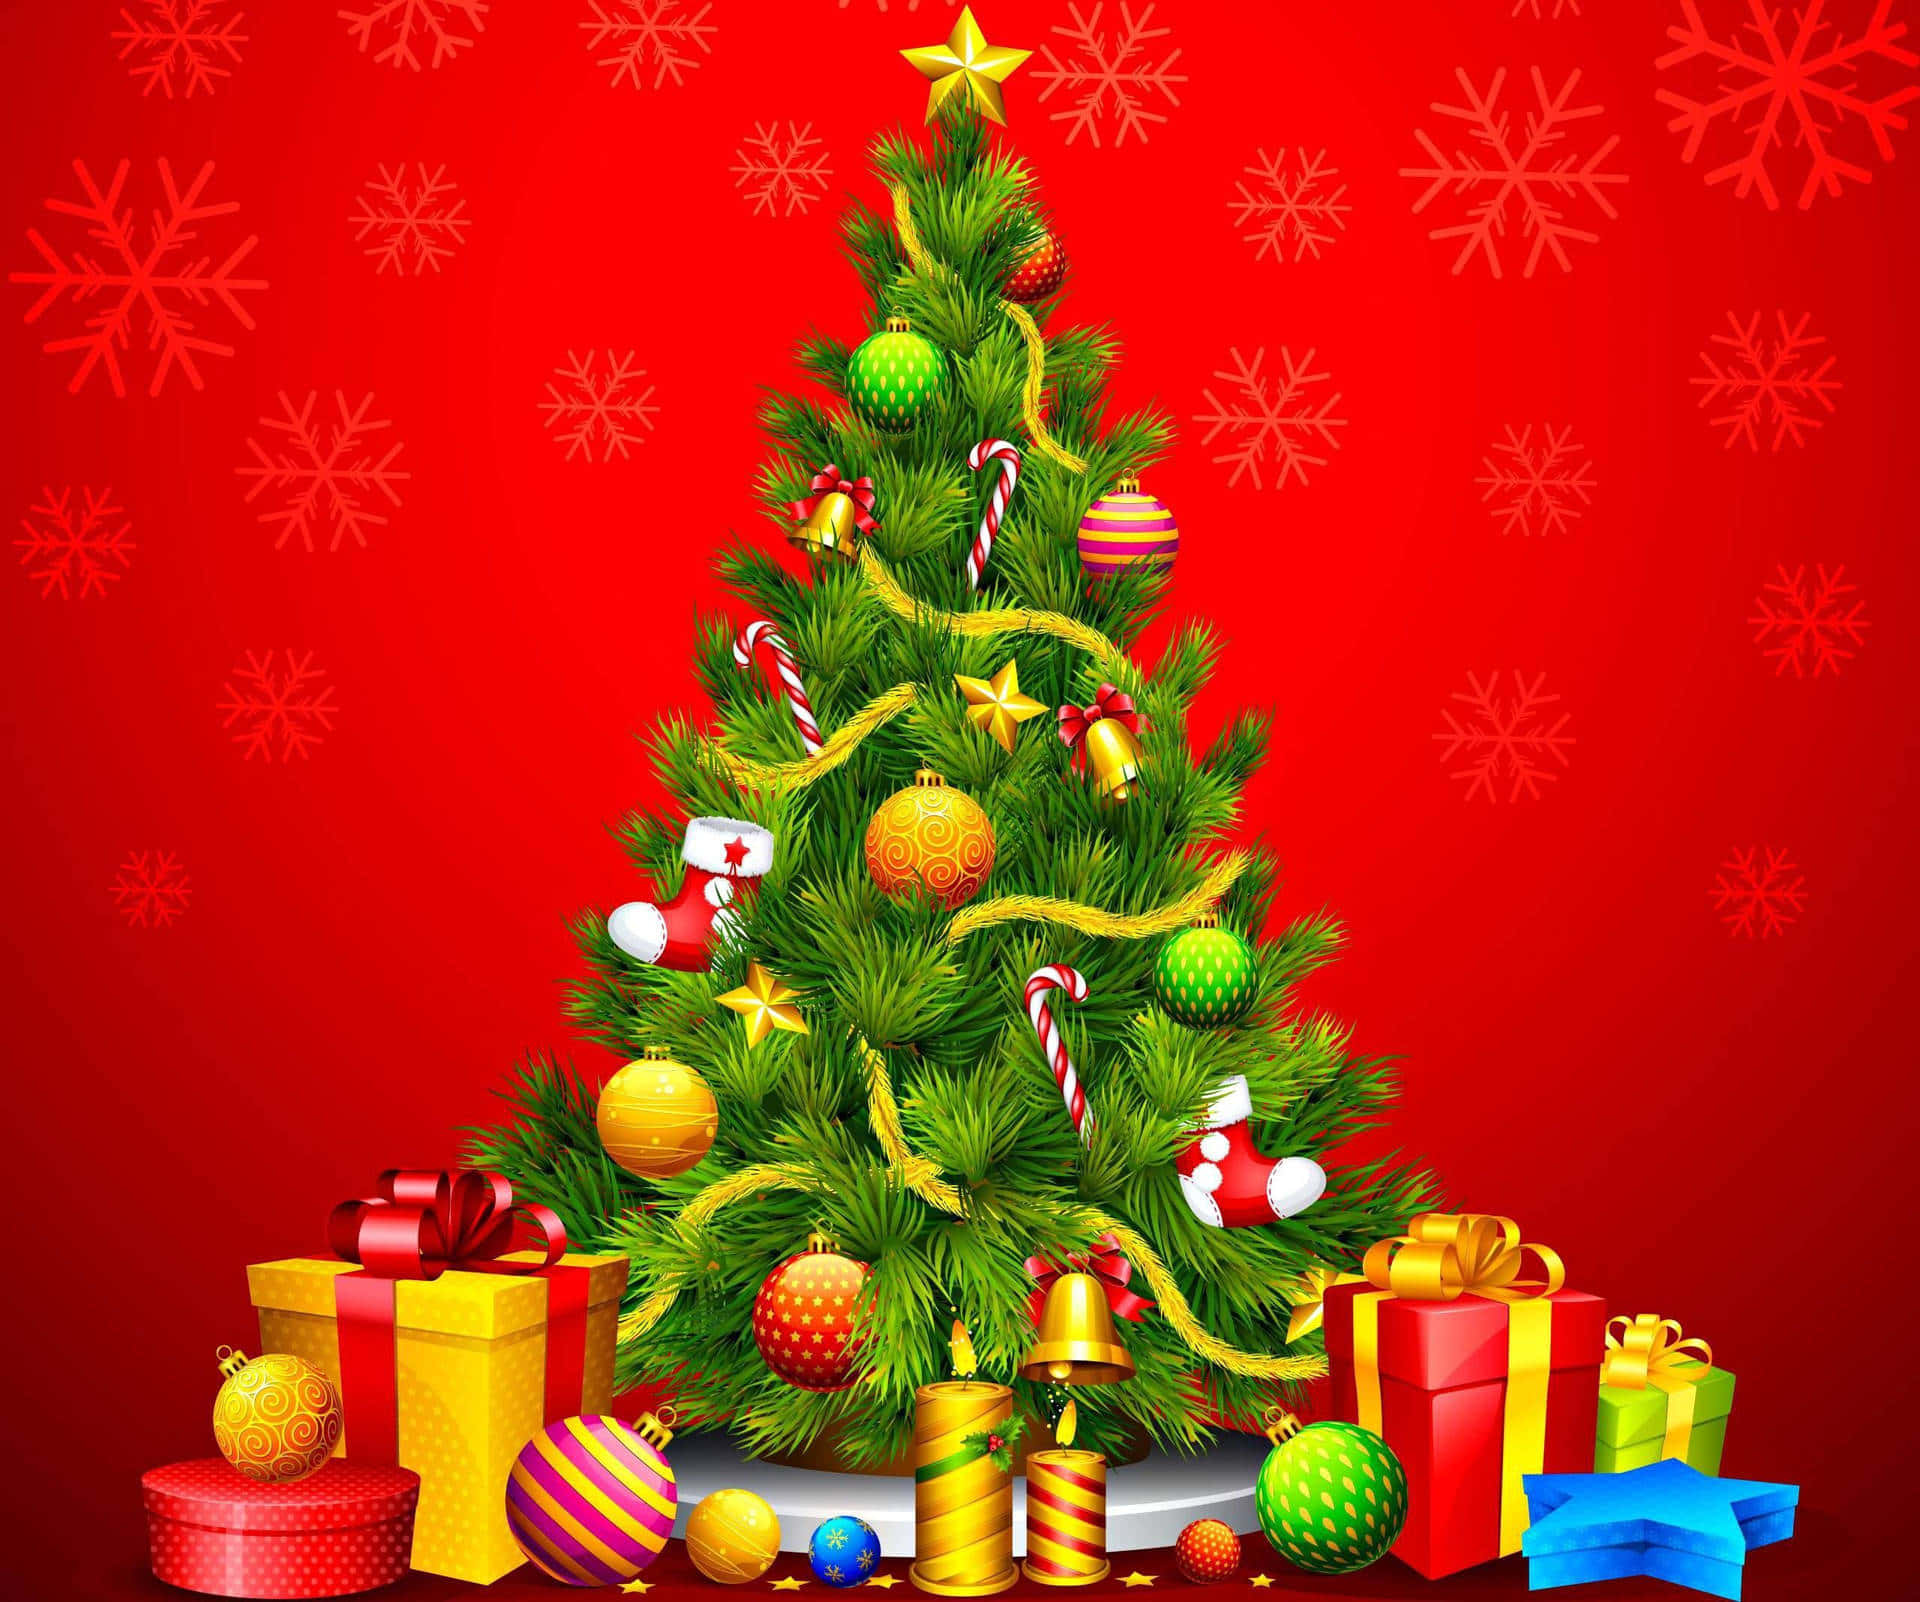 Celebrate the Holidays with a Bright and Festive Christmas Tree